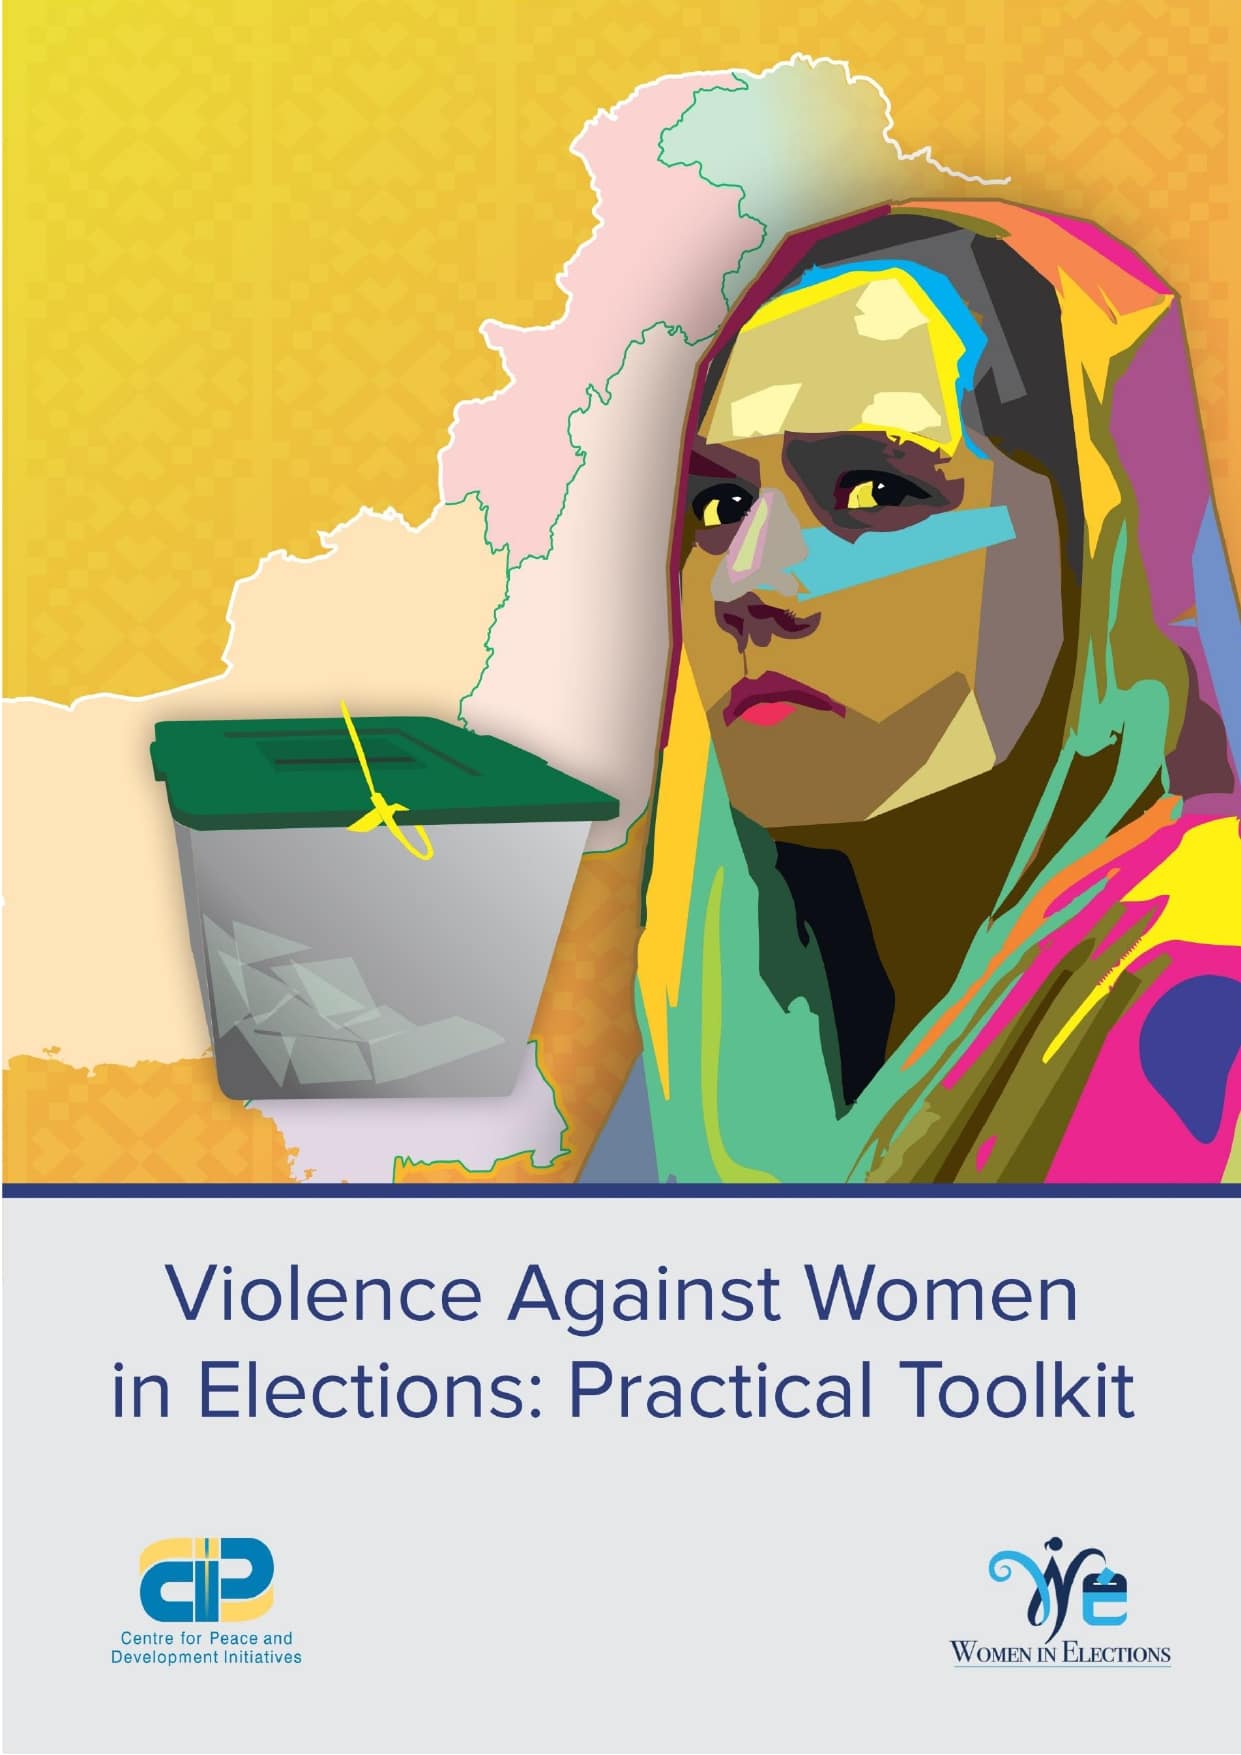 Violence Against Women in Elections: Practical Toolkit